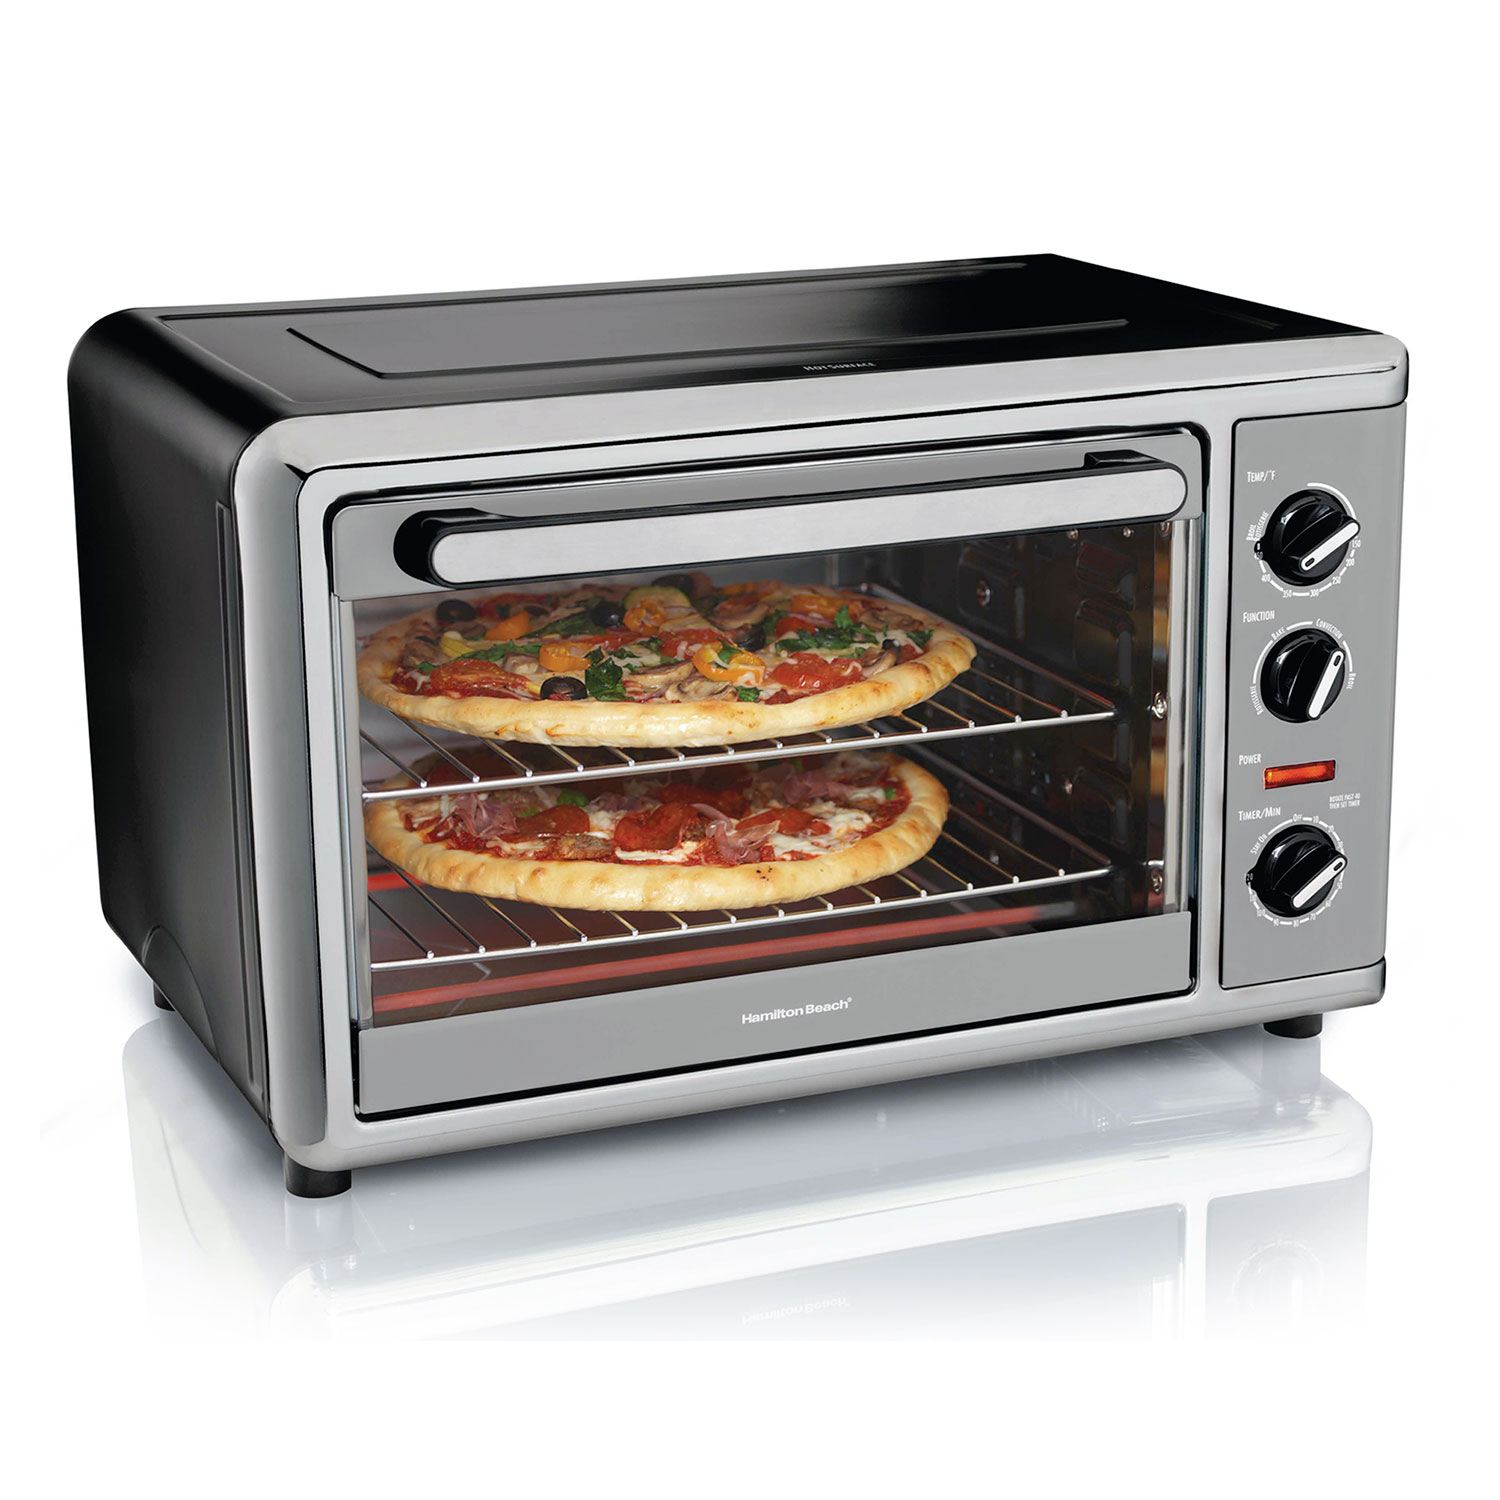 Countertop Oven with Convection & Rotisserie